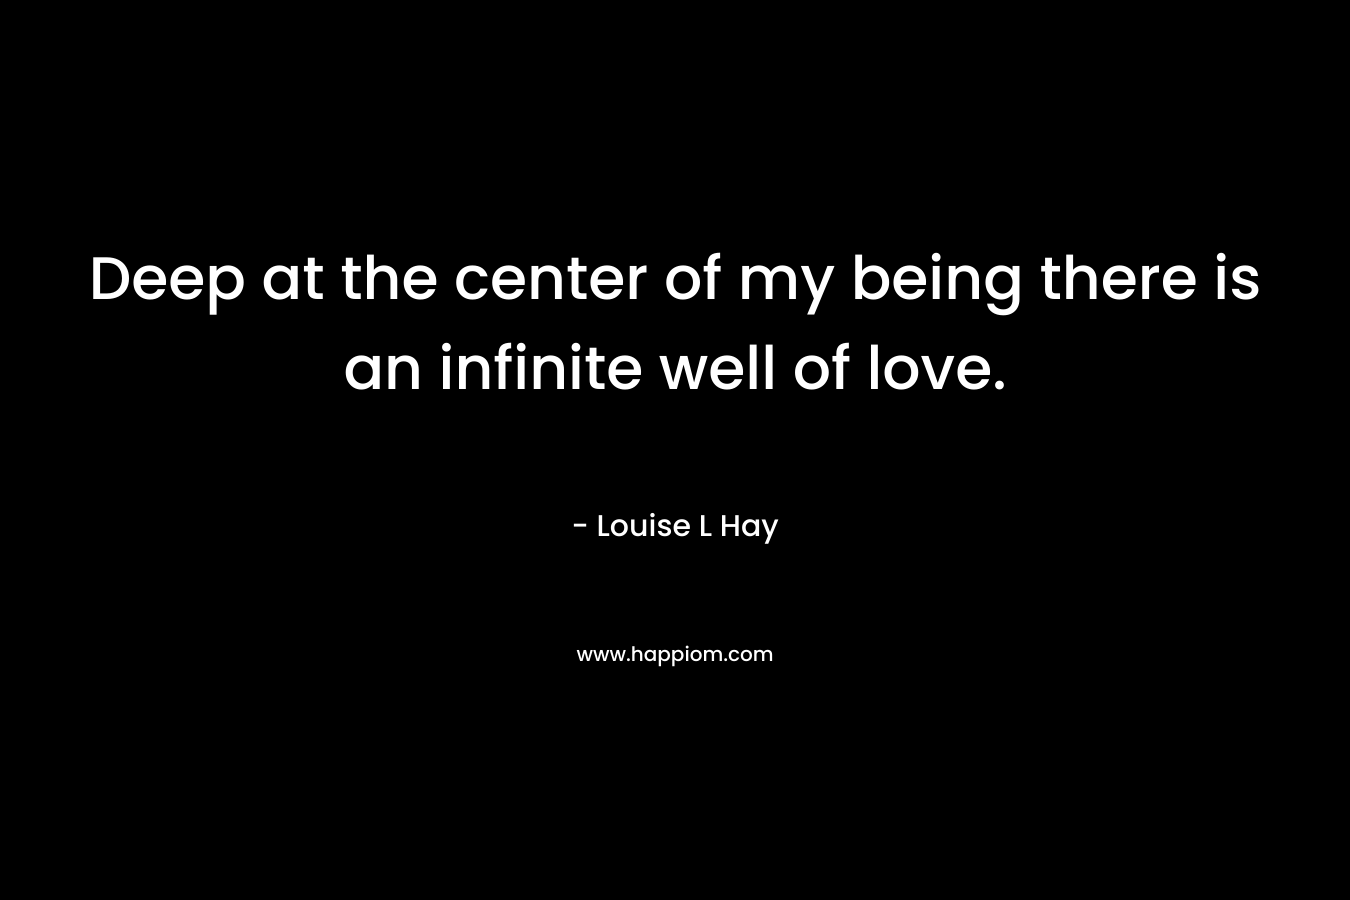 Deep at the center of my being there is an infinite well of love. – Louise L Hay